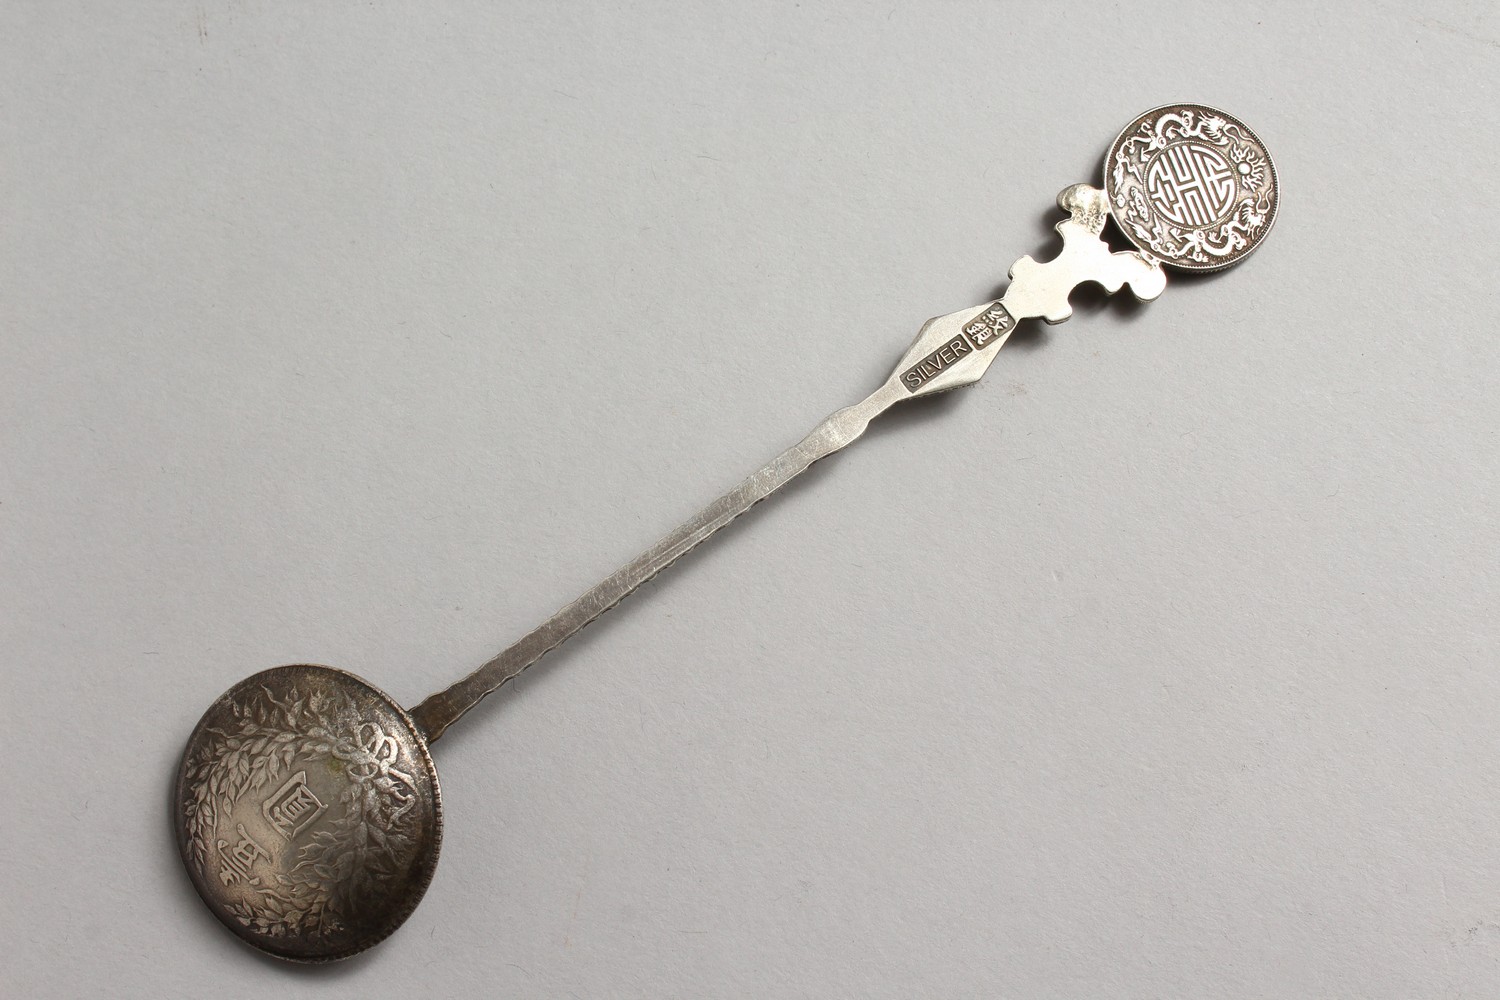 A GOOD CHINESE SILVER LADLE SPOON FORMED FROM CURRENCY, The bowl of the spoon formed from a - Image 4 of 6